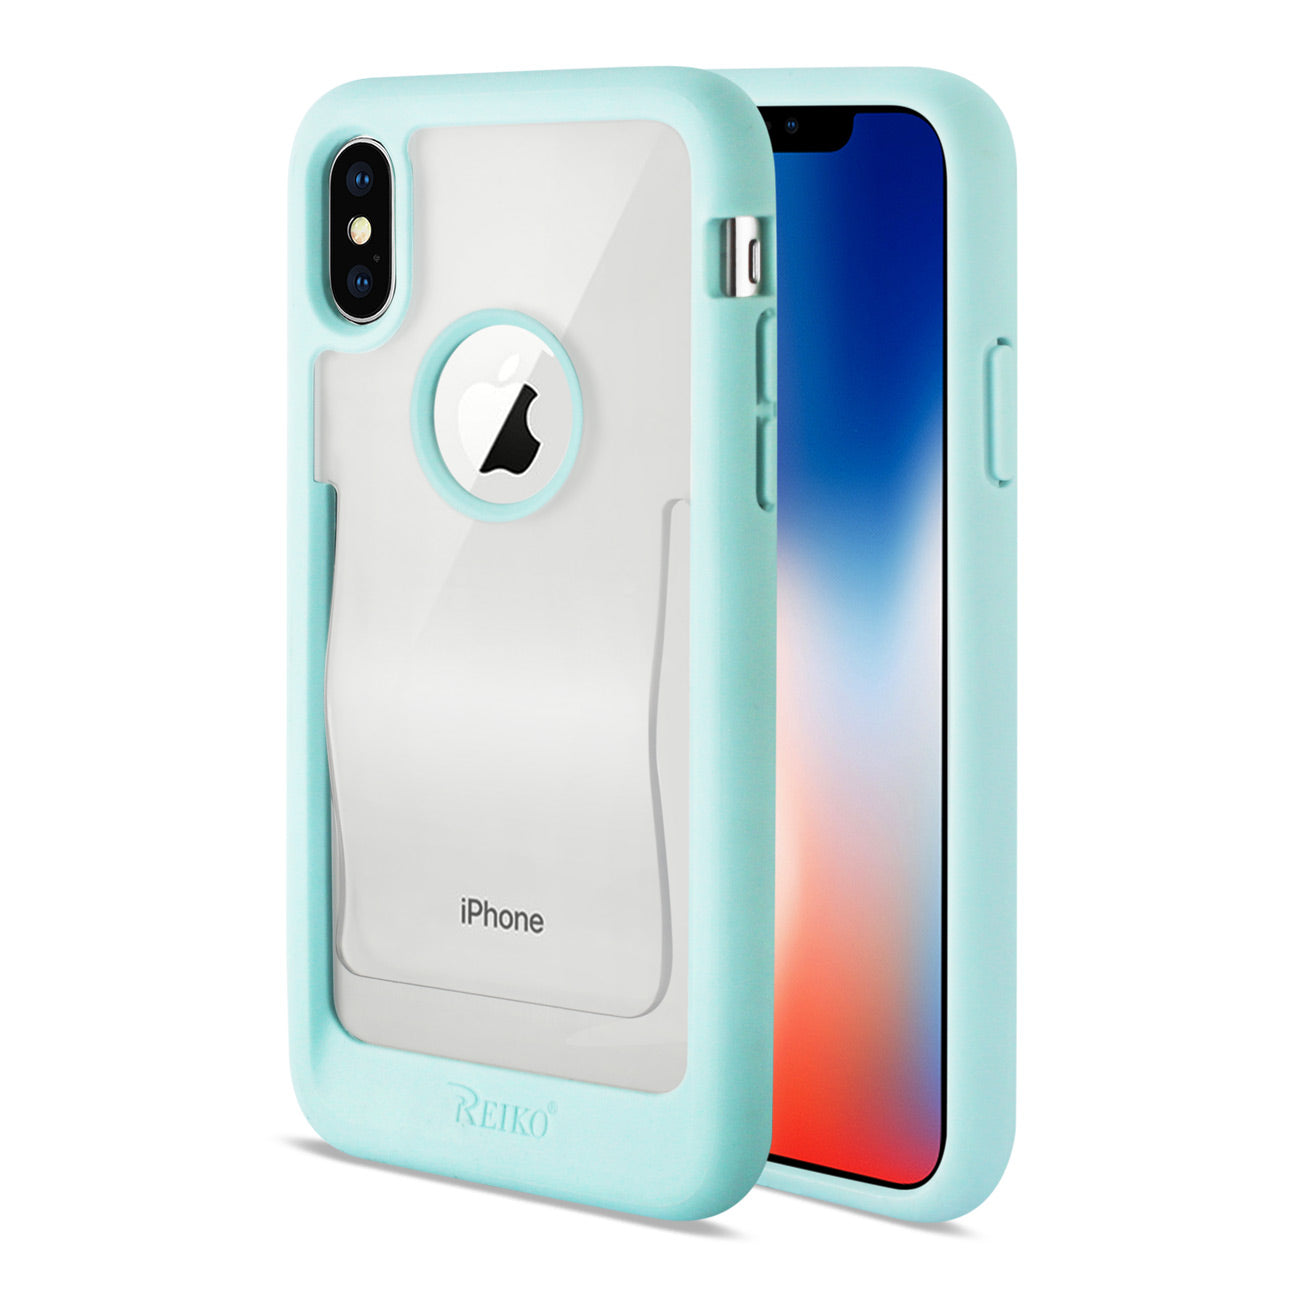 Reiko iPhone X/iPhone XS Belt Clip Polymer Case In Clear Mint Green